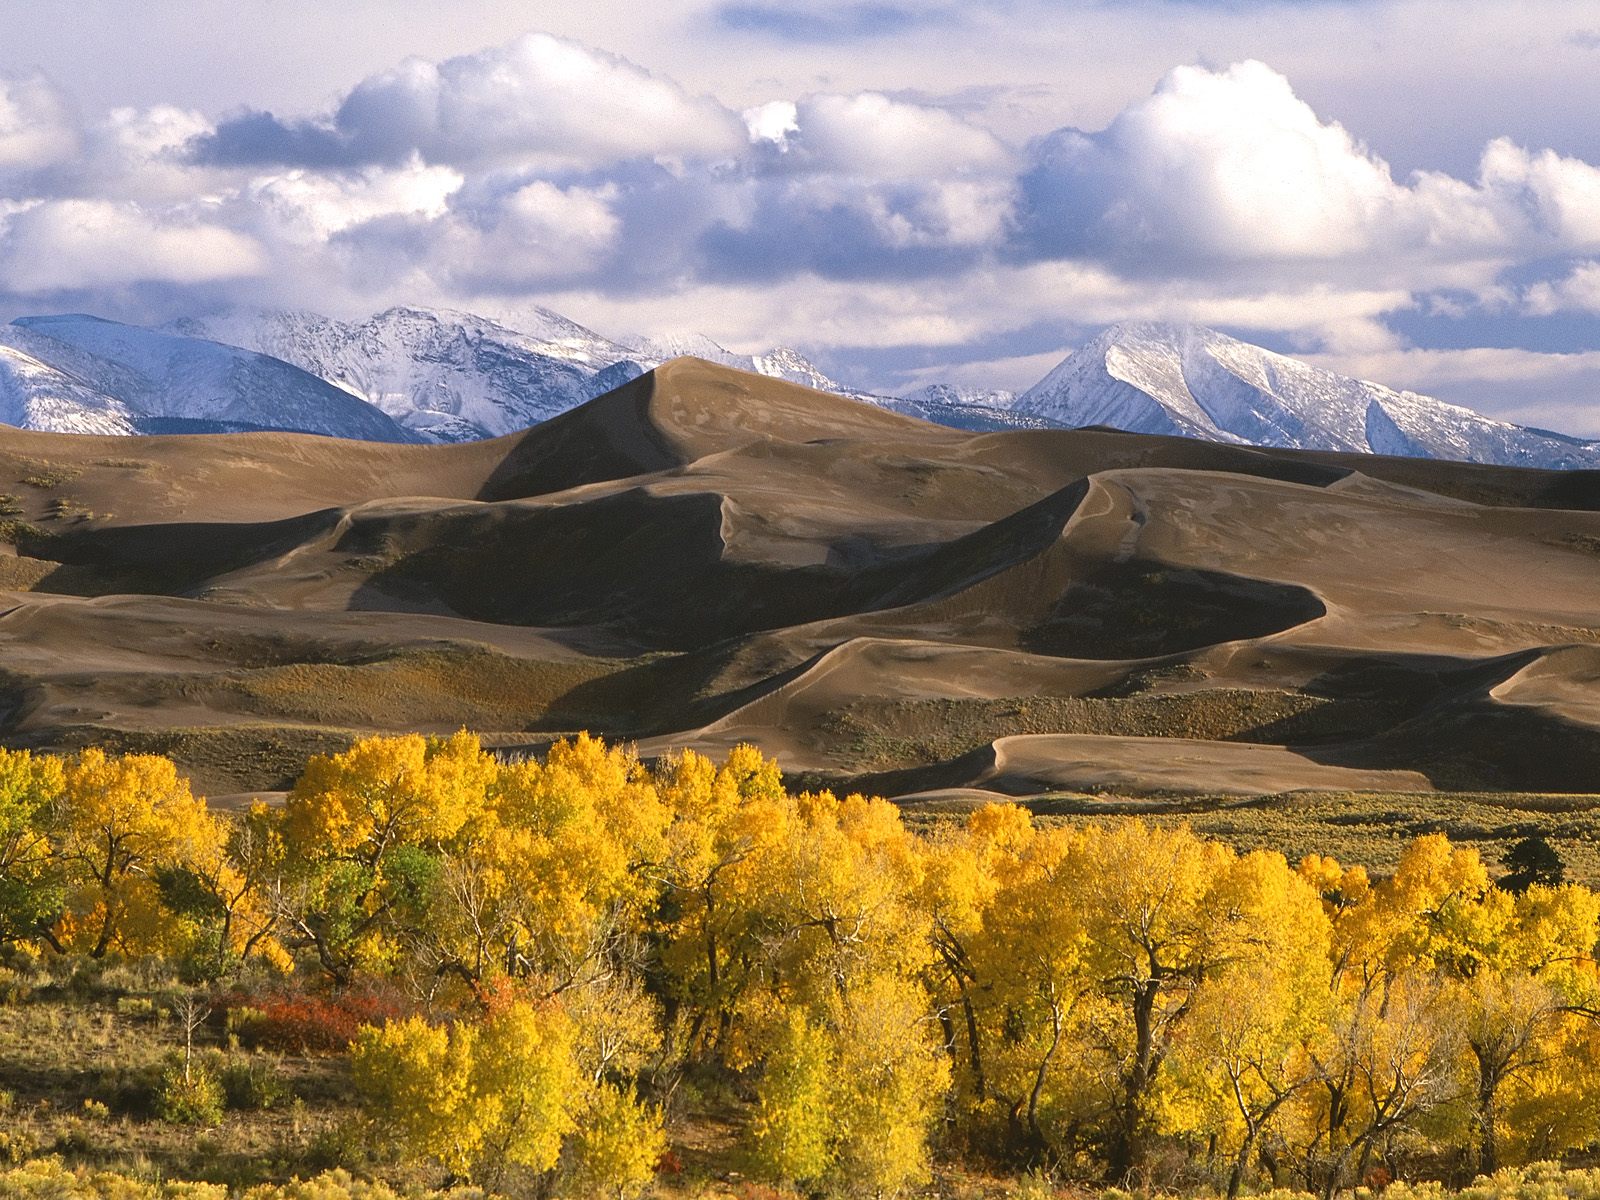 Dunes and Fall Color Colorado photo or wallpaper